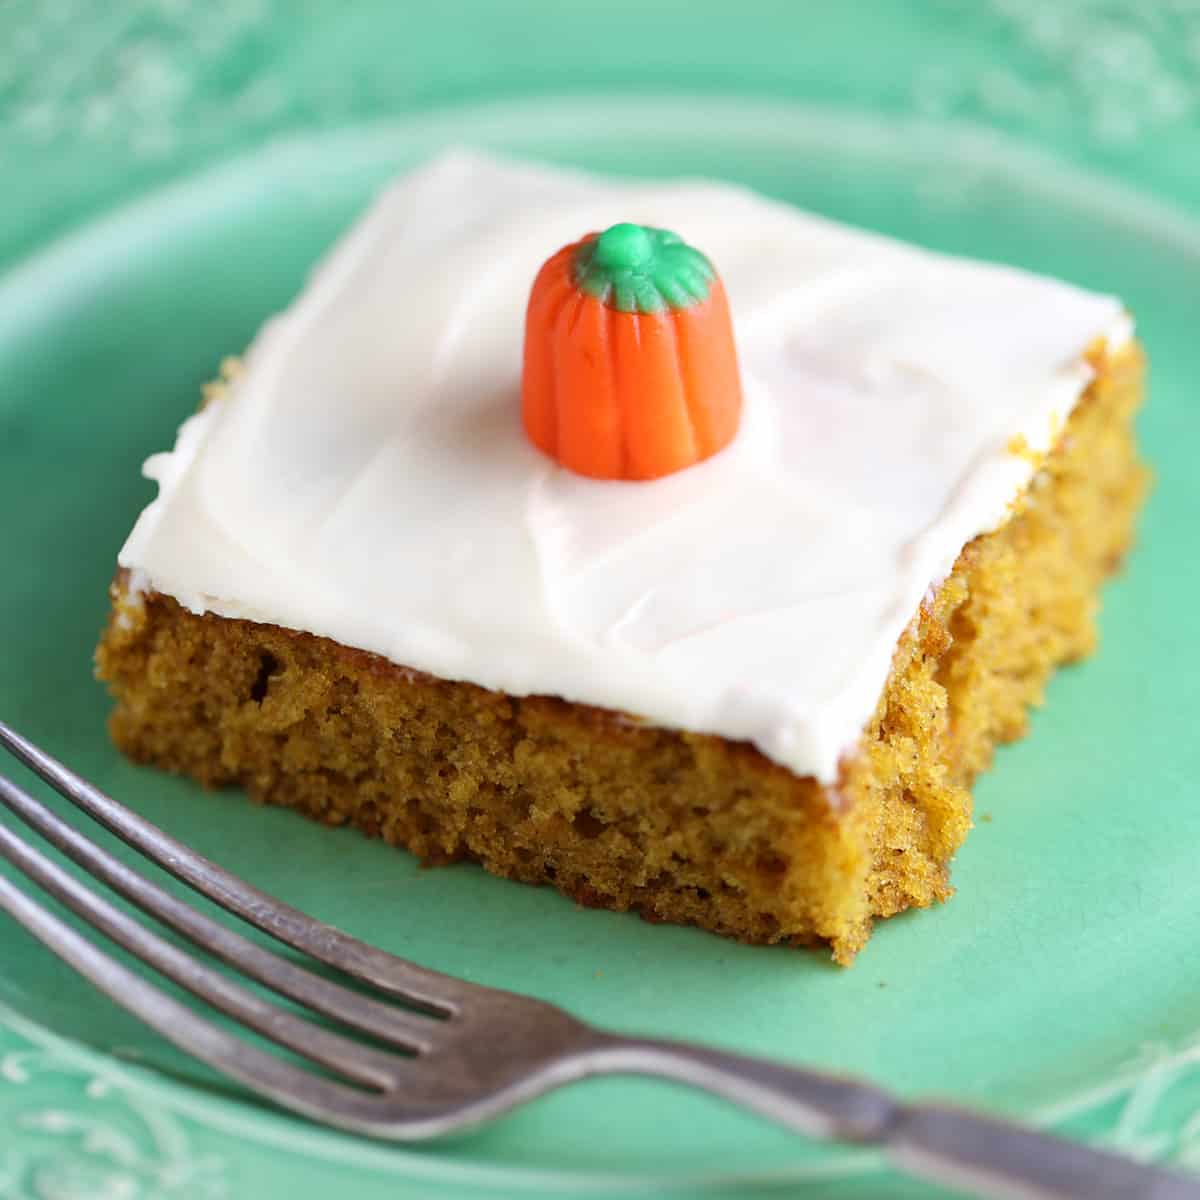 One pumpkin bar on green plate with fork on side.